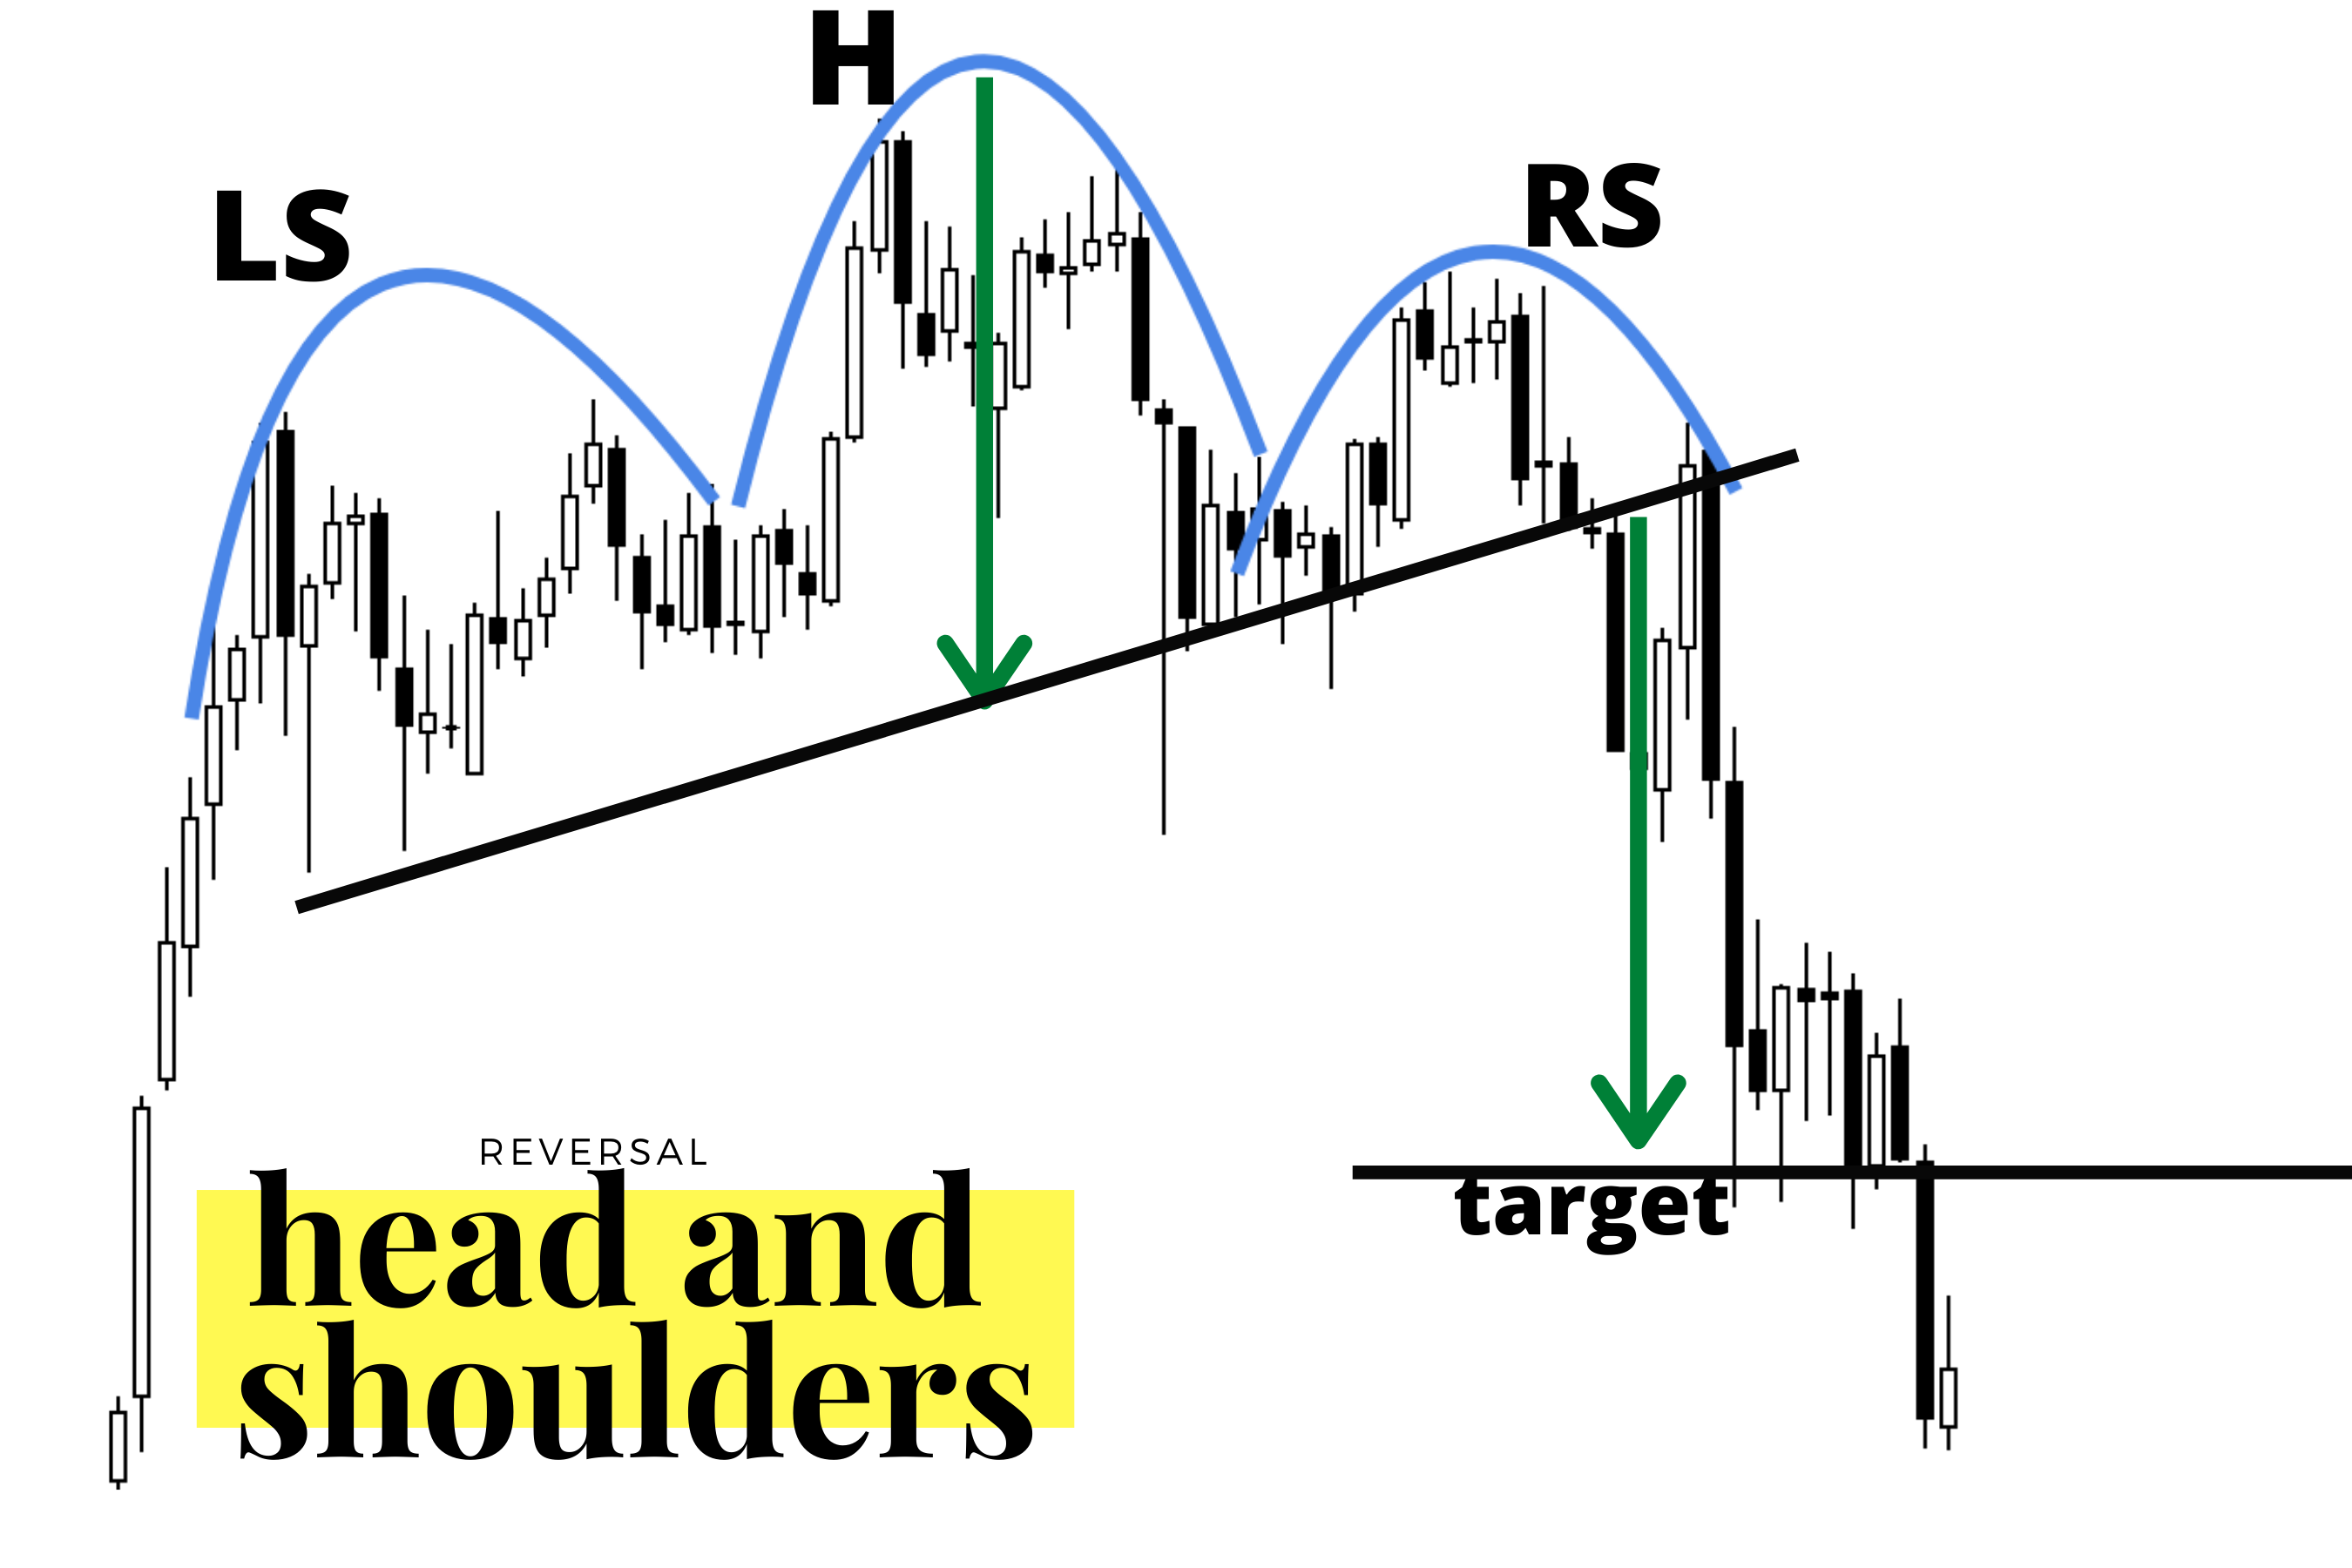 Steve Burns on X: Continuation Chart Patterns: Chart patterns are